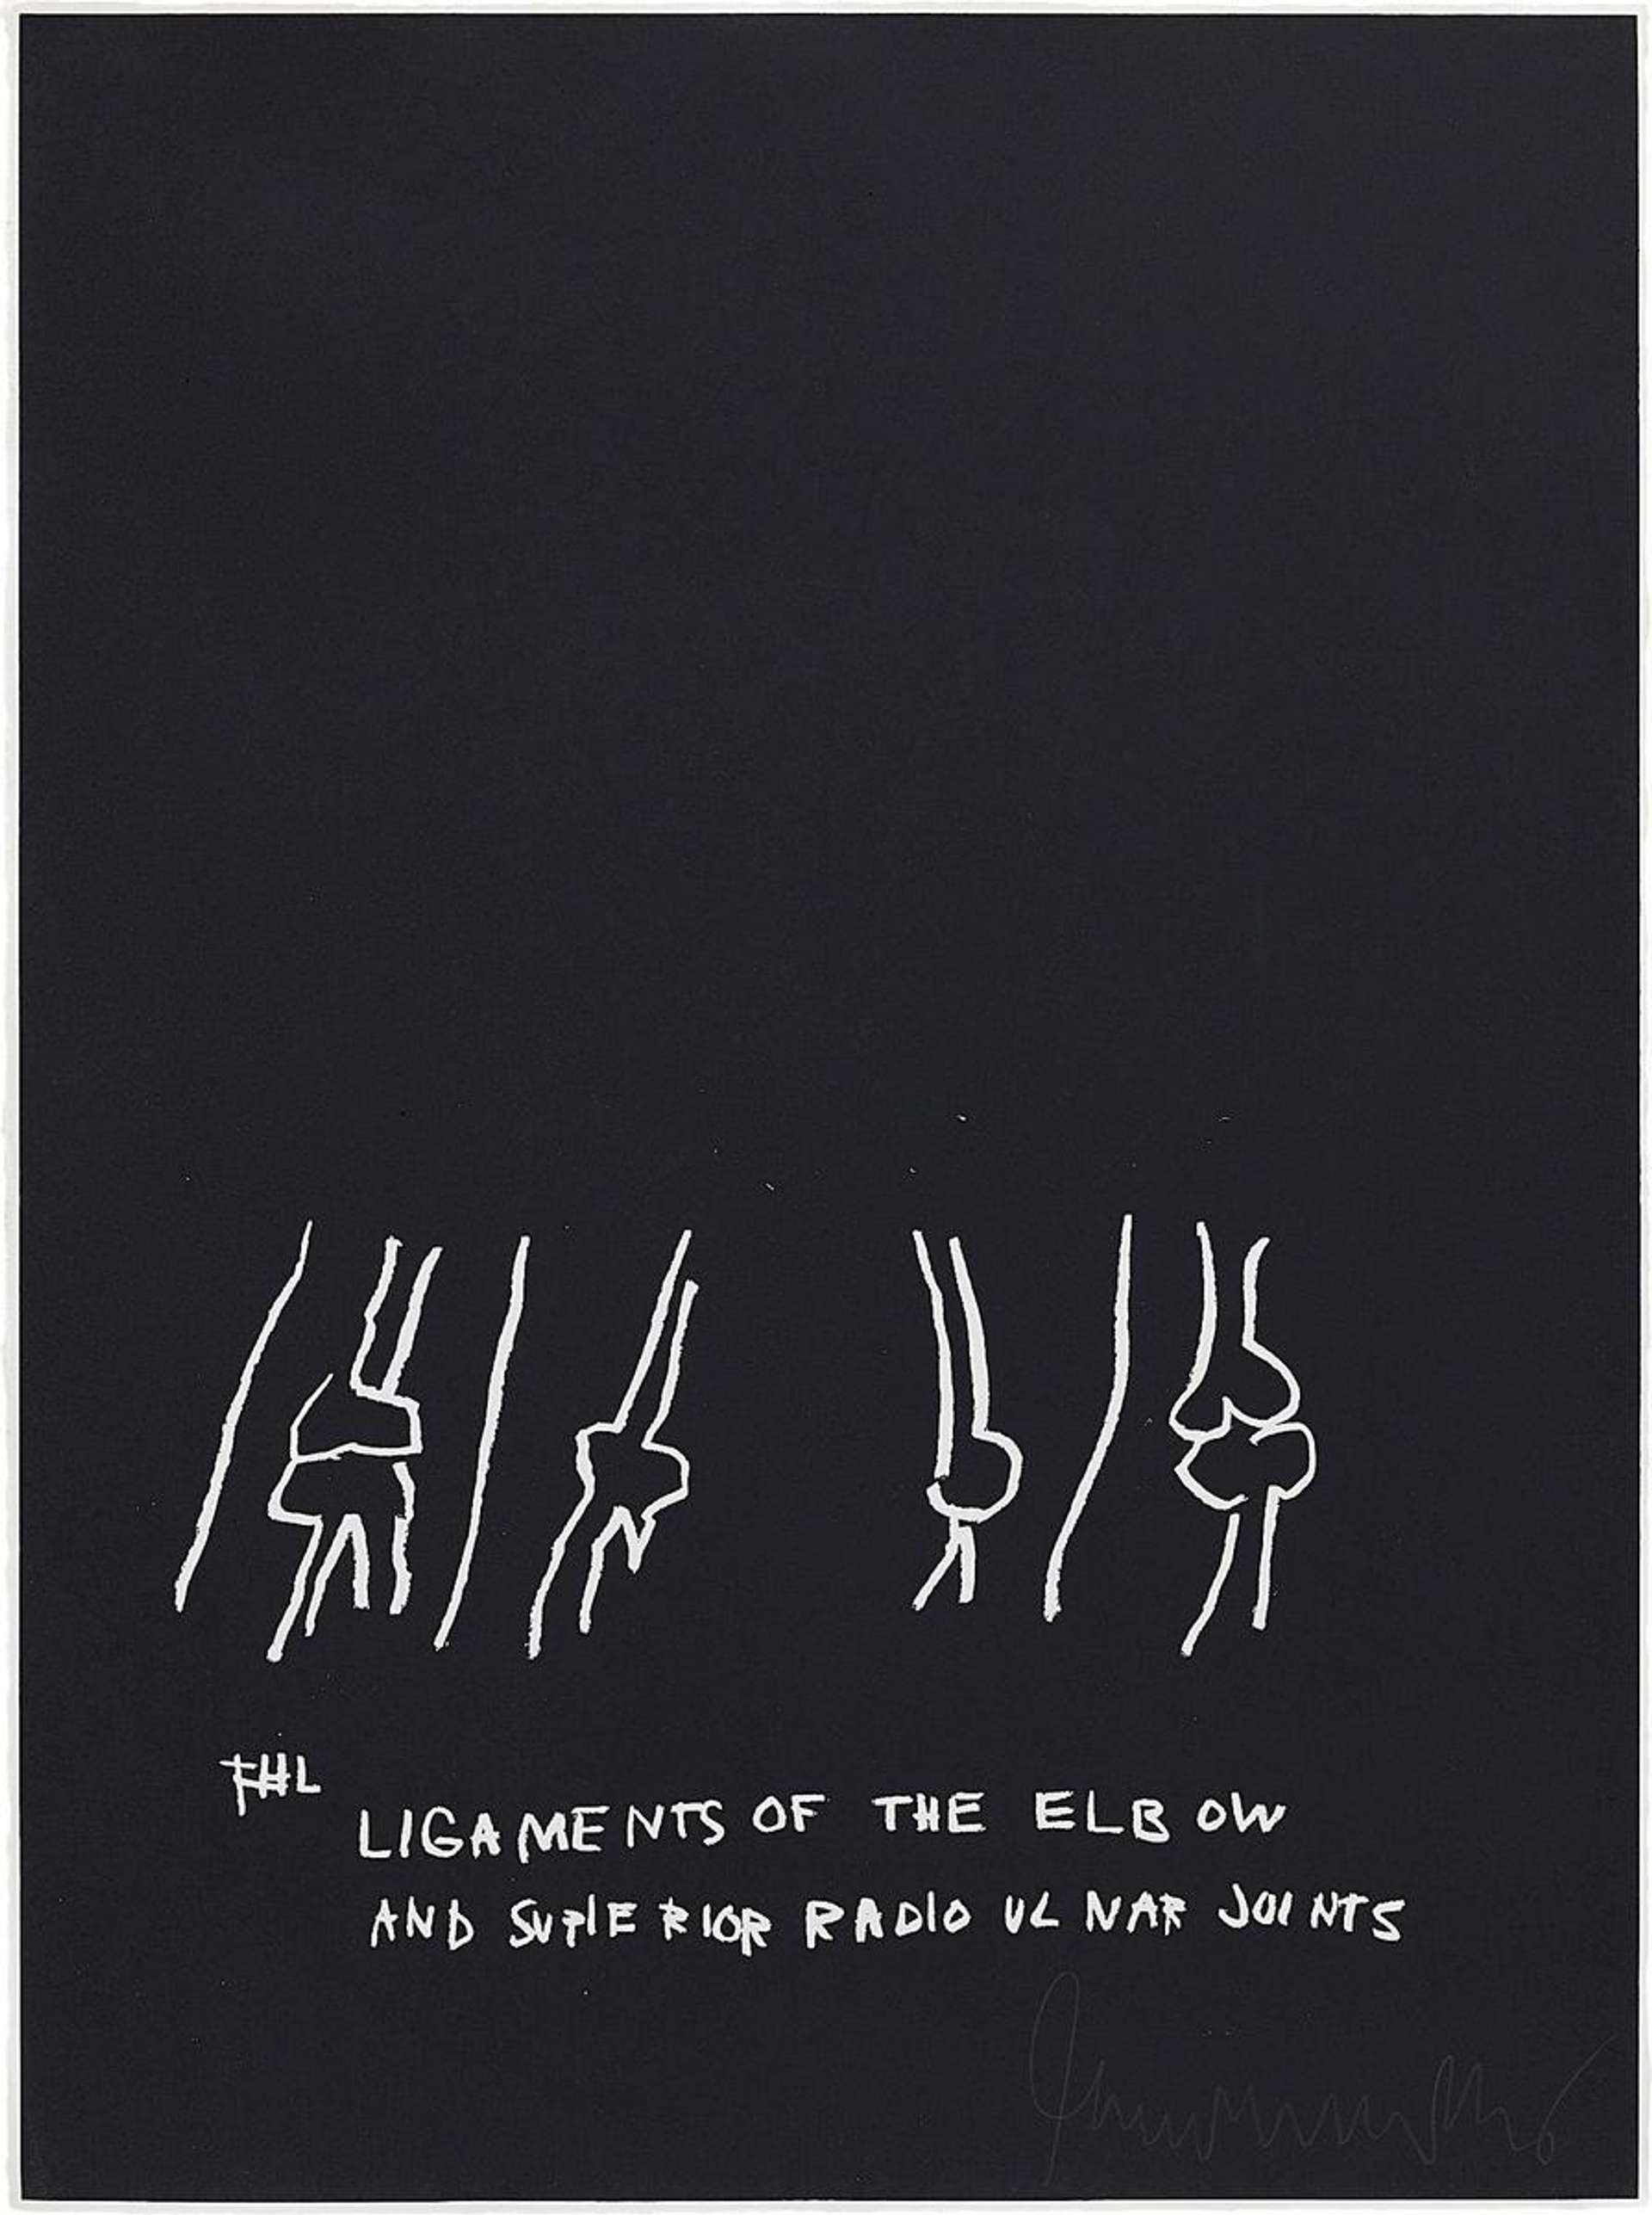 Anatomy, Ligaments Of The Elbow - Signed Print by Jean-Michel Basquiat 1982 - MyArtBroker